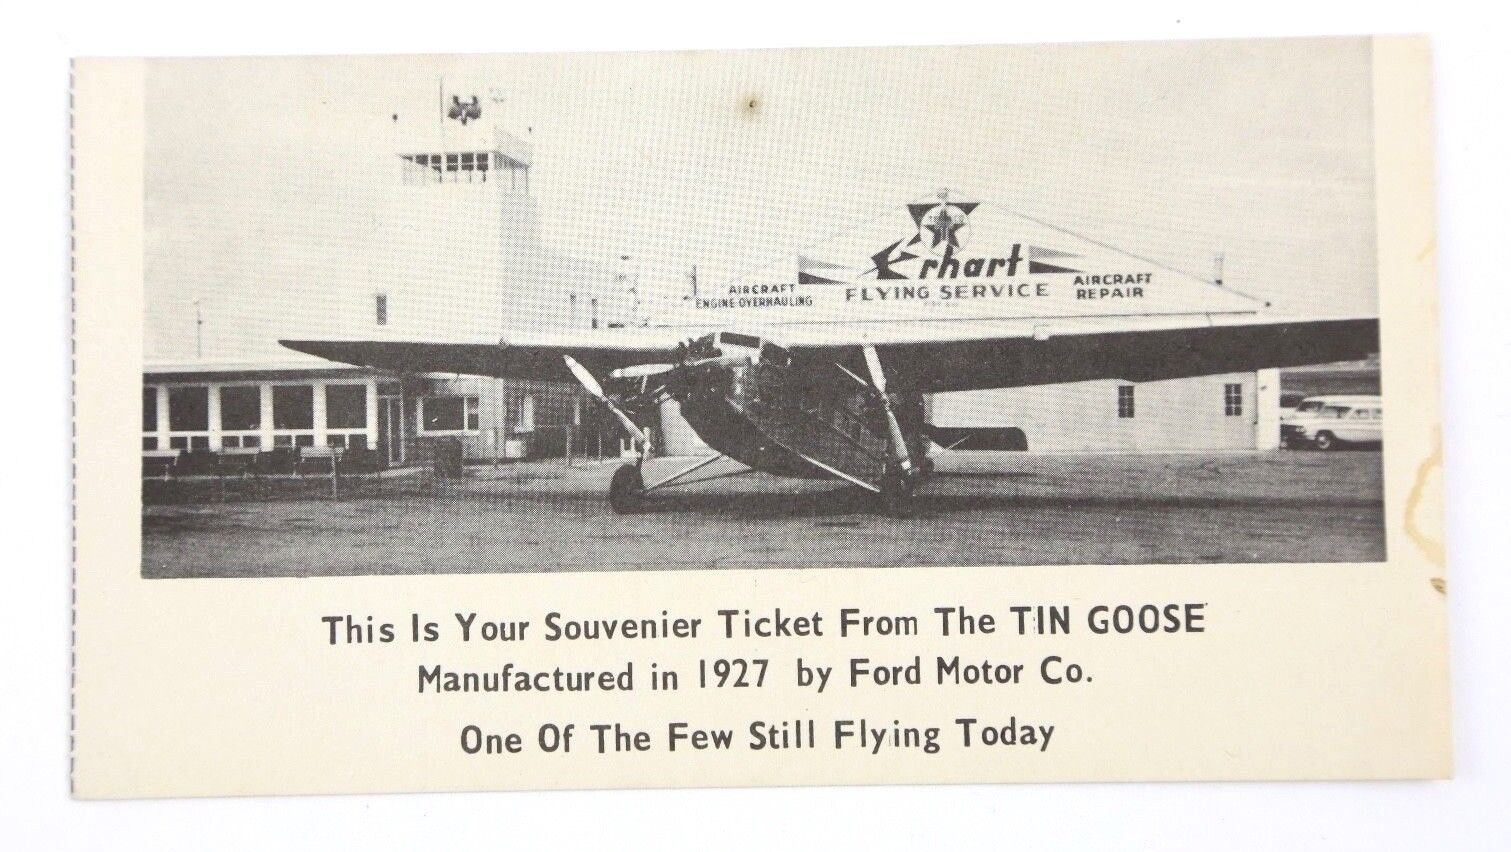 Souvenir Ticket from Tin Goose 1927 Ford Motor Co Trimotor Airplane Airline